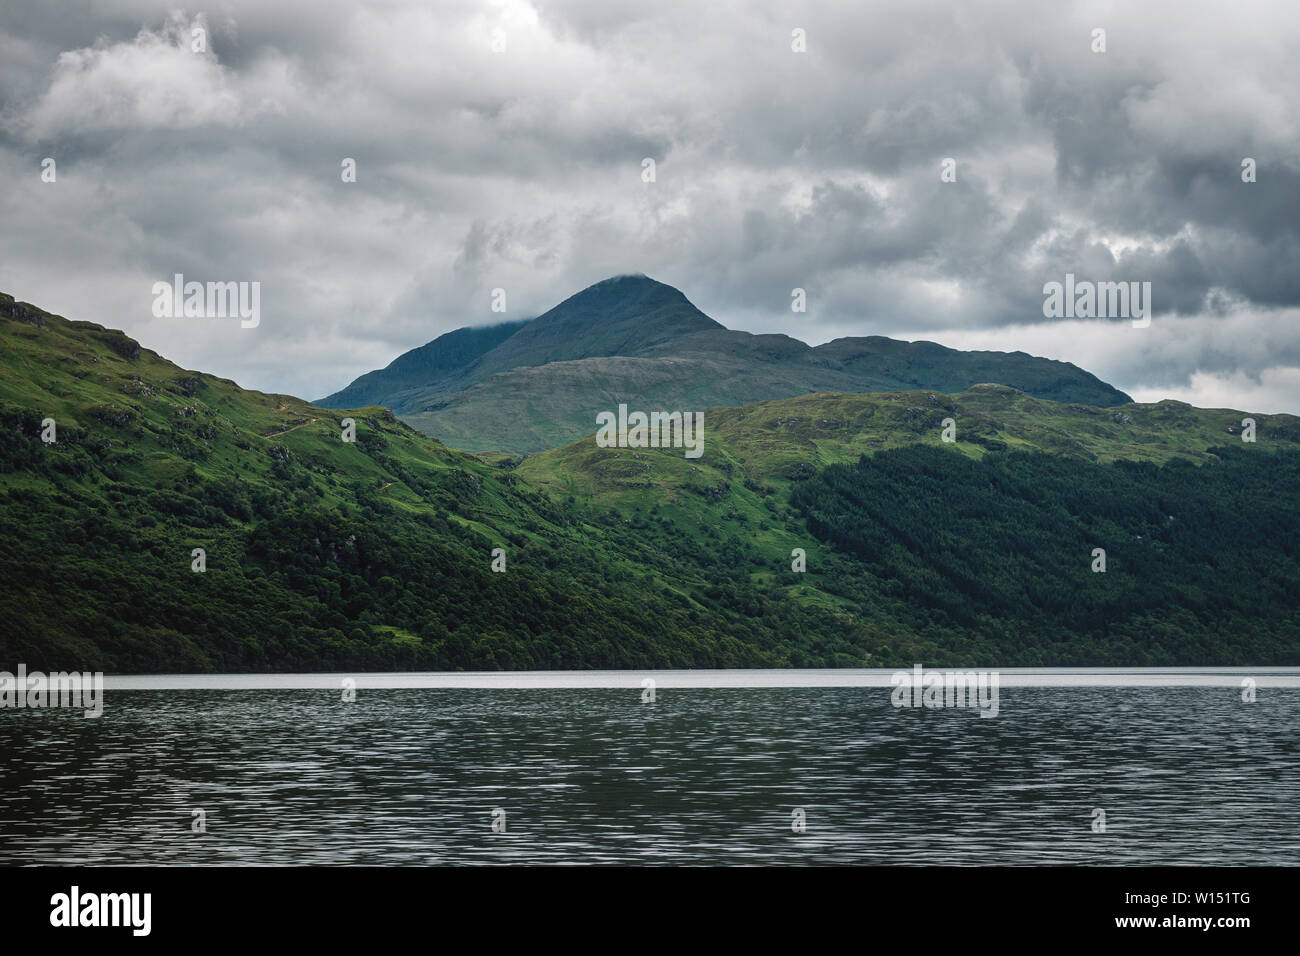 Scottish landscape with lake view and clouds covered green mountains. Summer 2019. Loch Lomond, Scotland Stock Photo